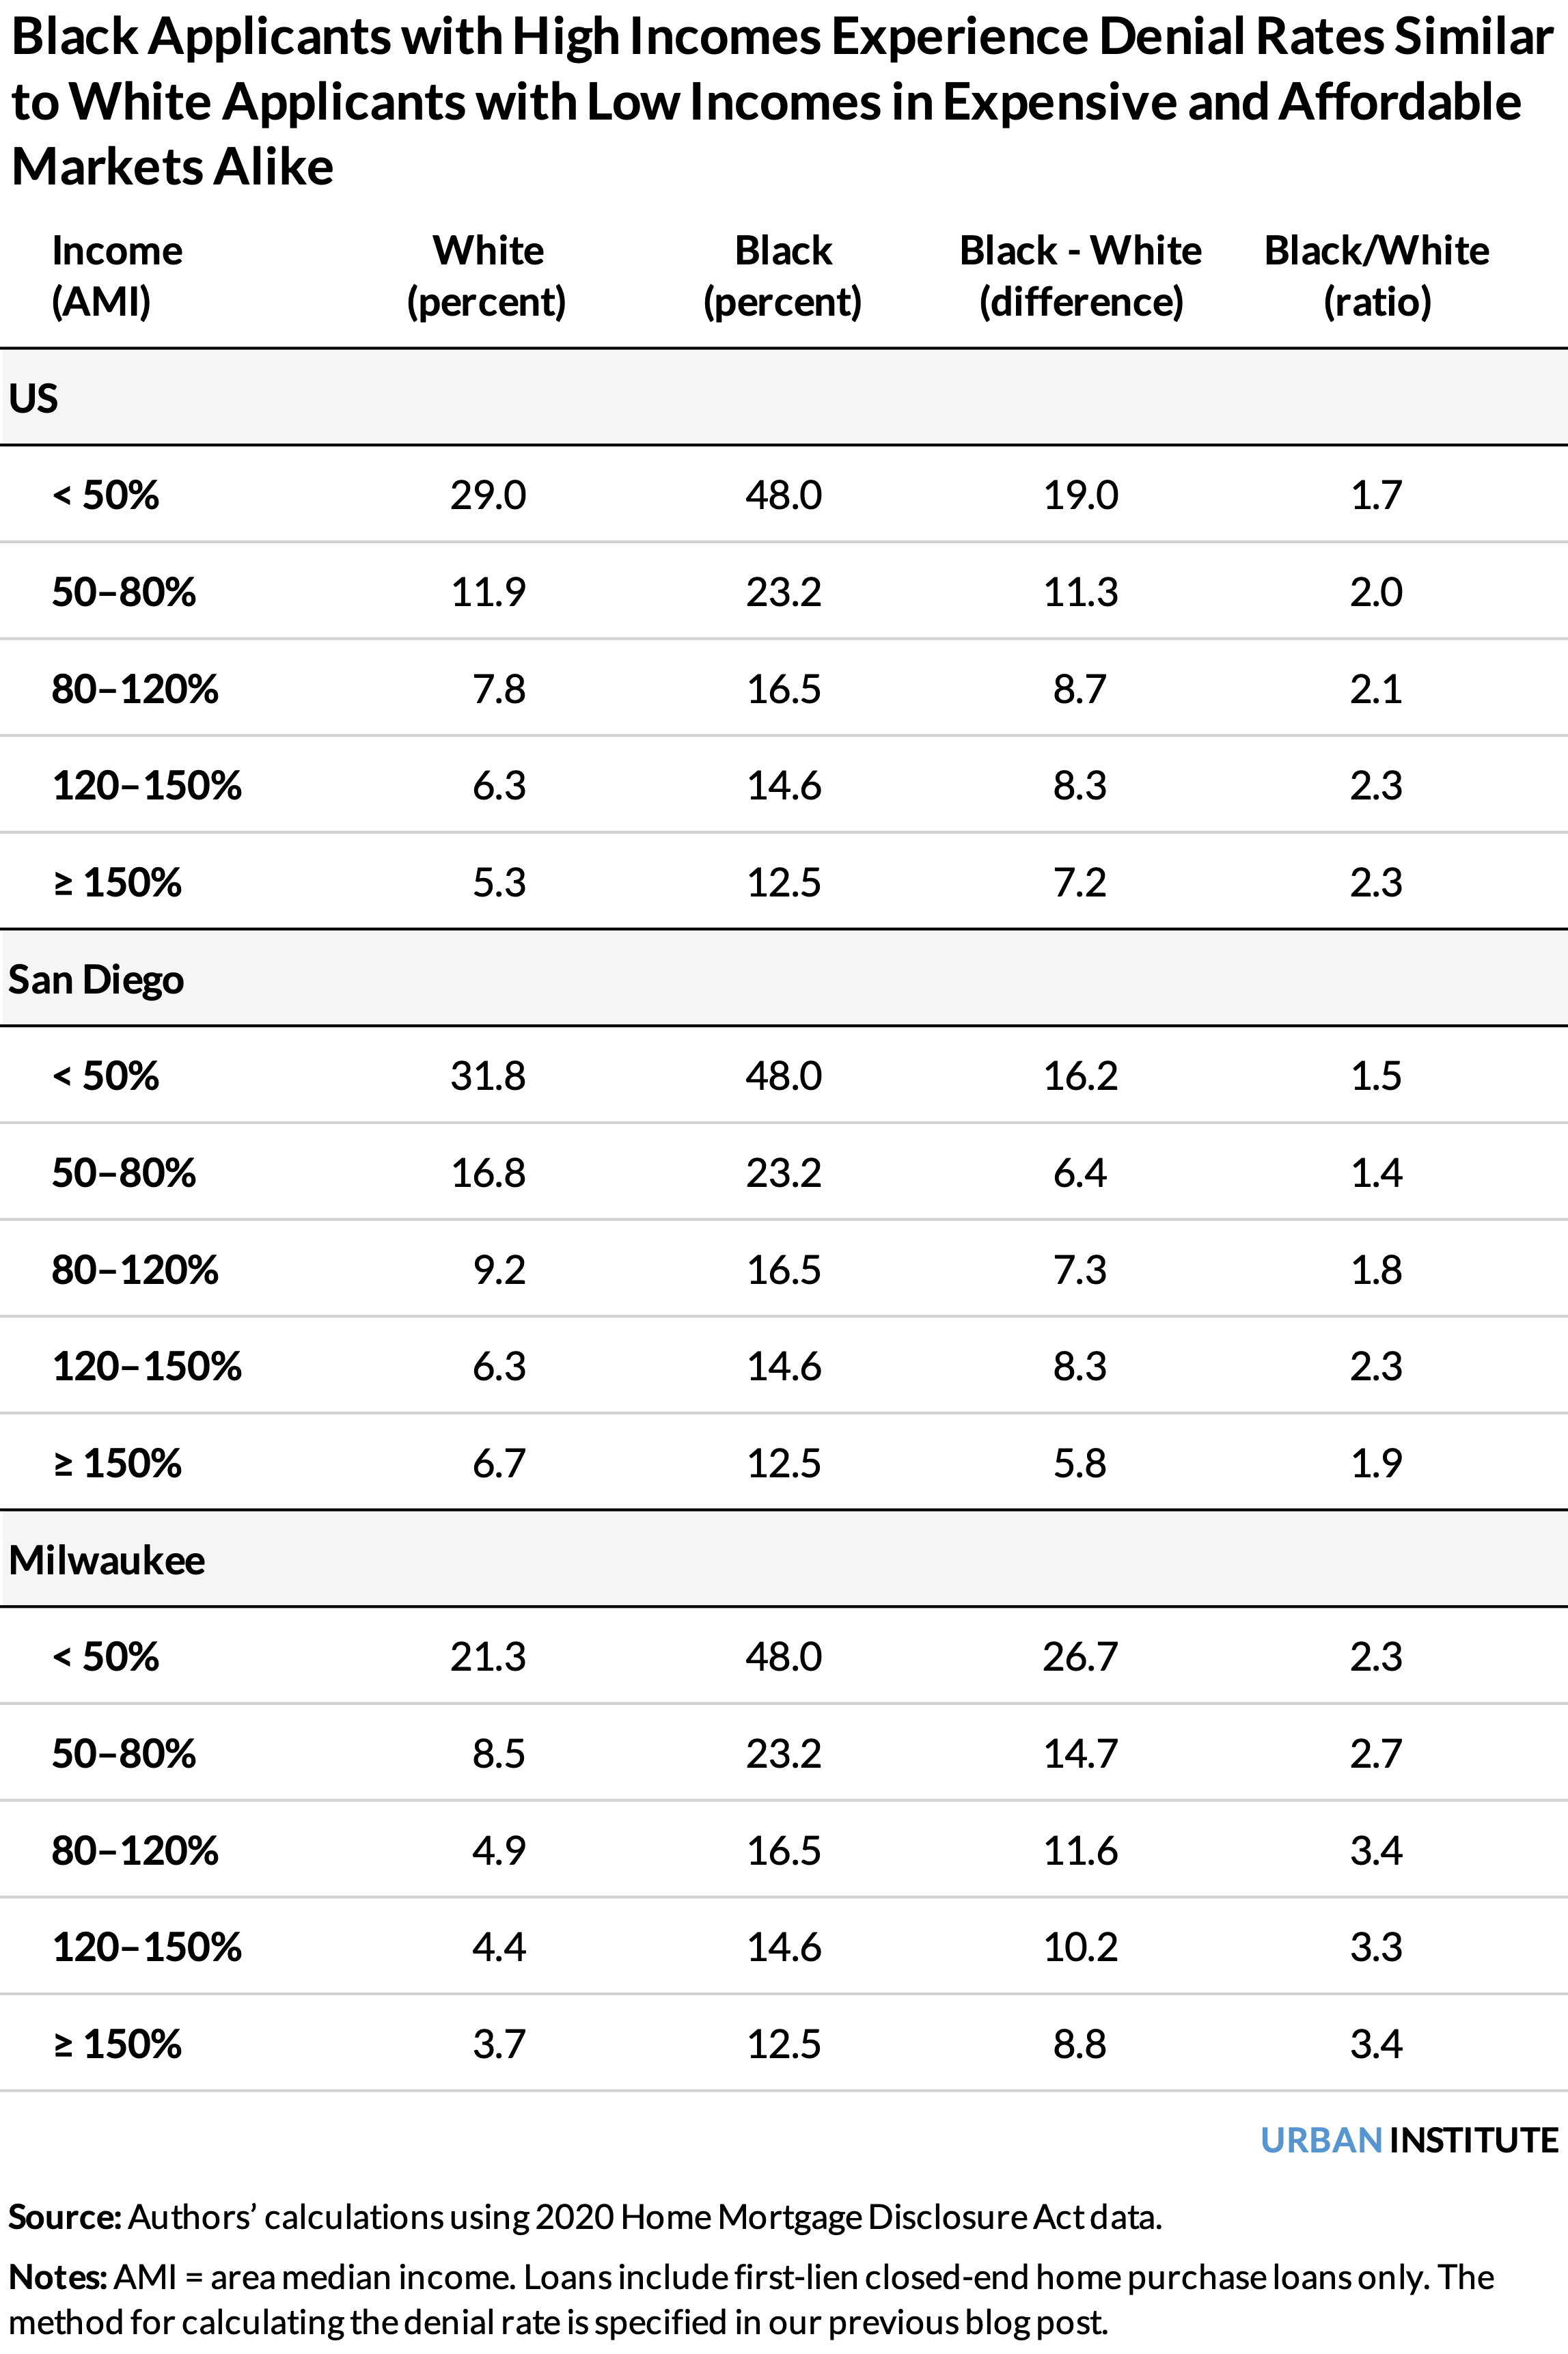 Table showing that Black applicants with high incomes experience denial rates similar to white applicants with low incomes in expensive and affordable markets alike